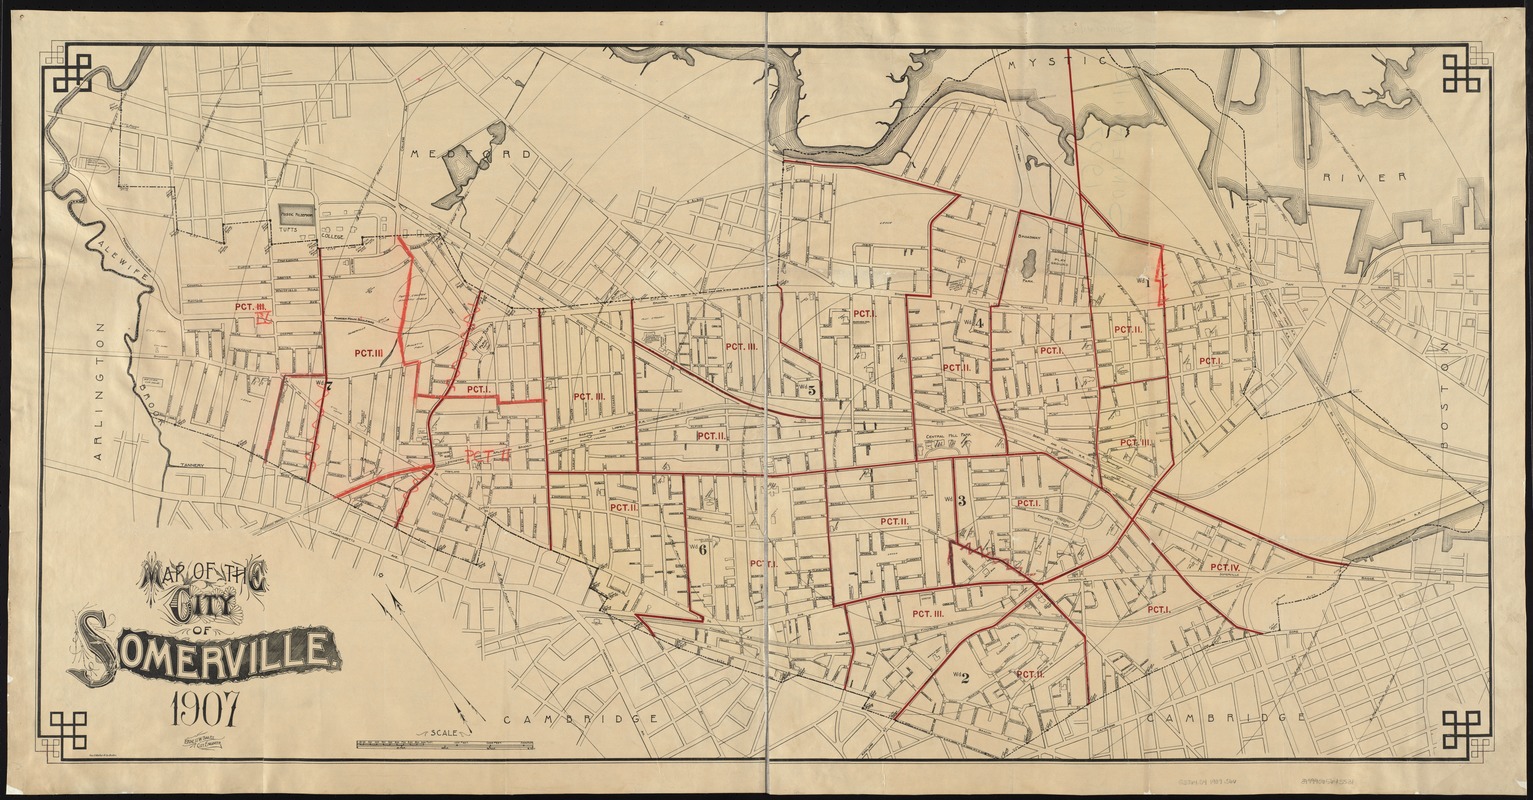 Map of the city of Somerville, 1907